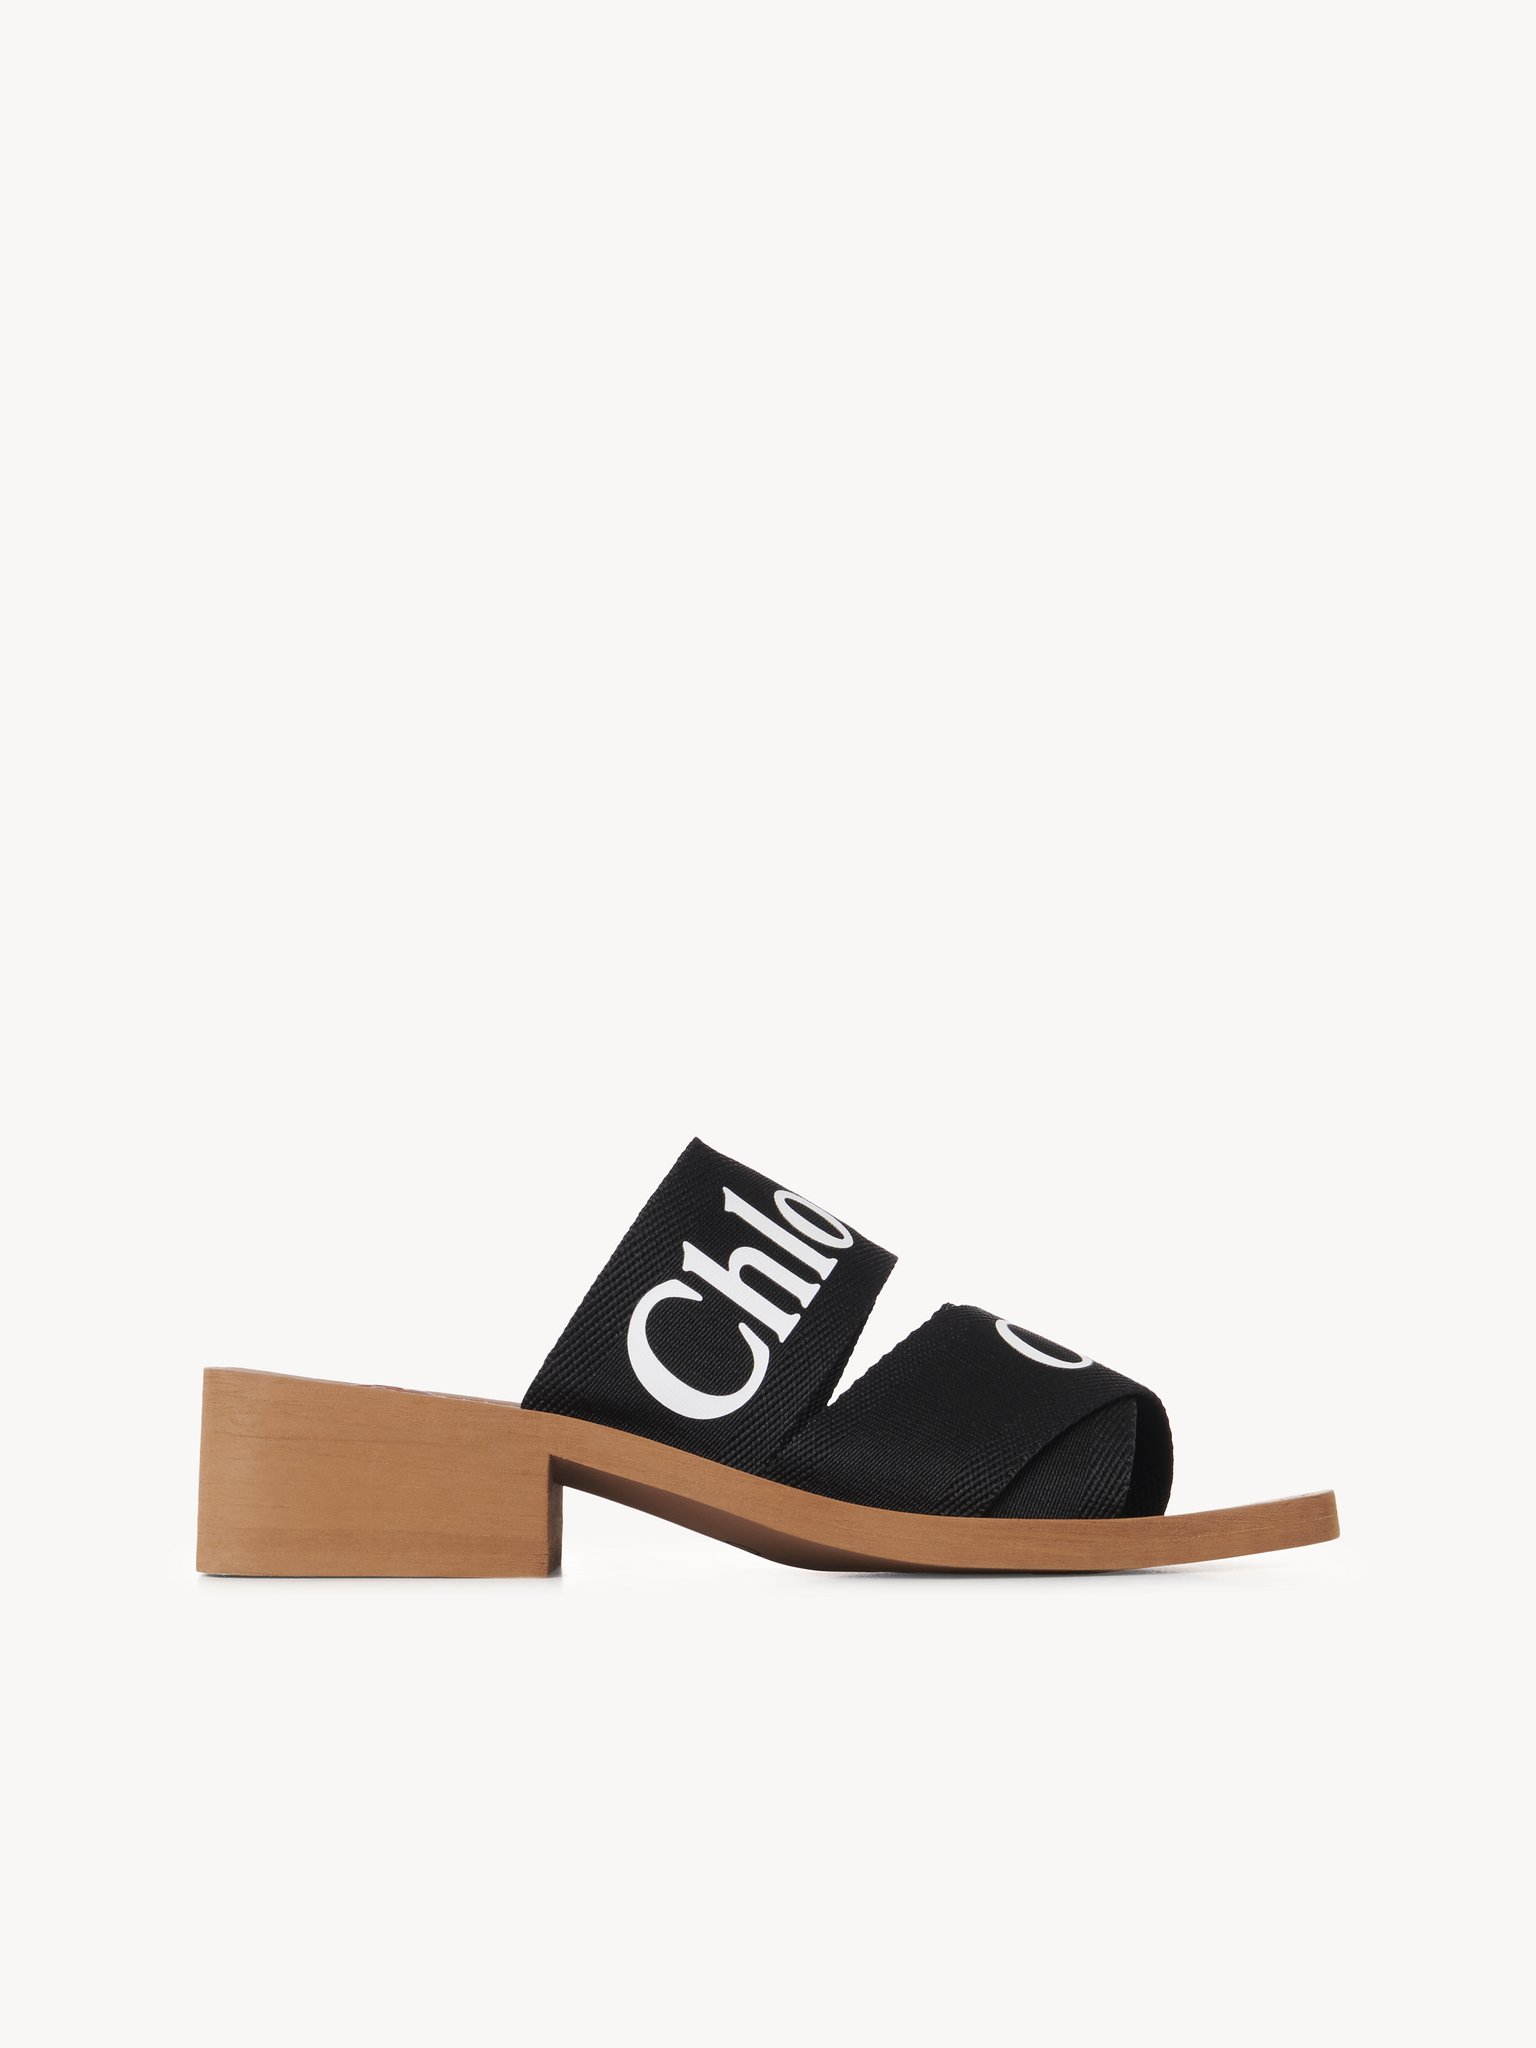 Chloe Sandals: The It Sandals Every Fashion Person Is Loving | Who What ...